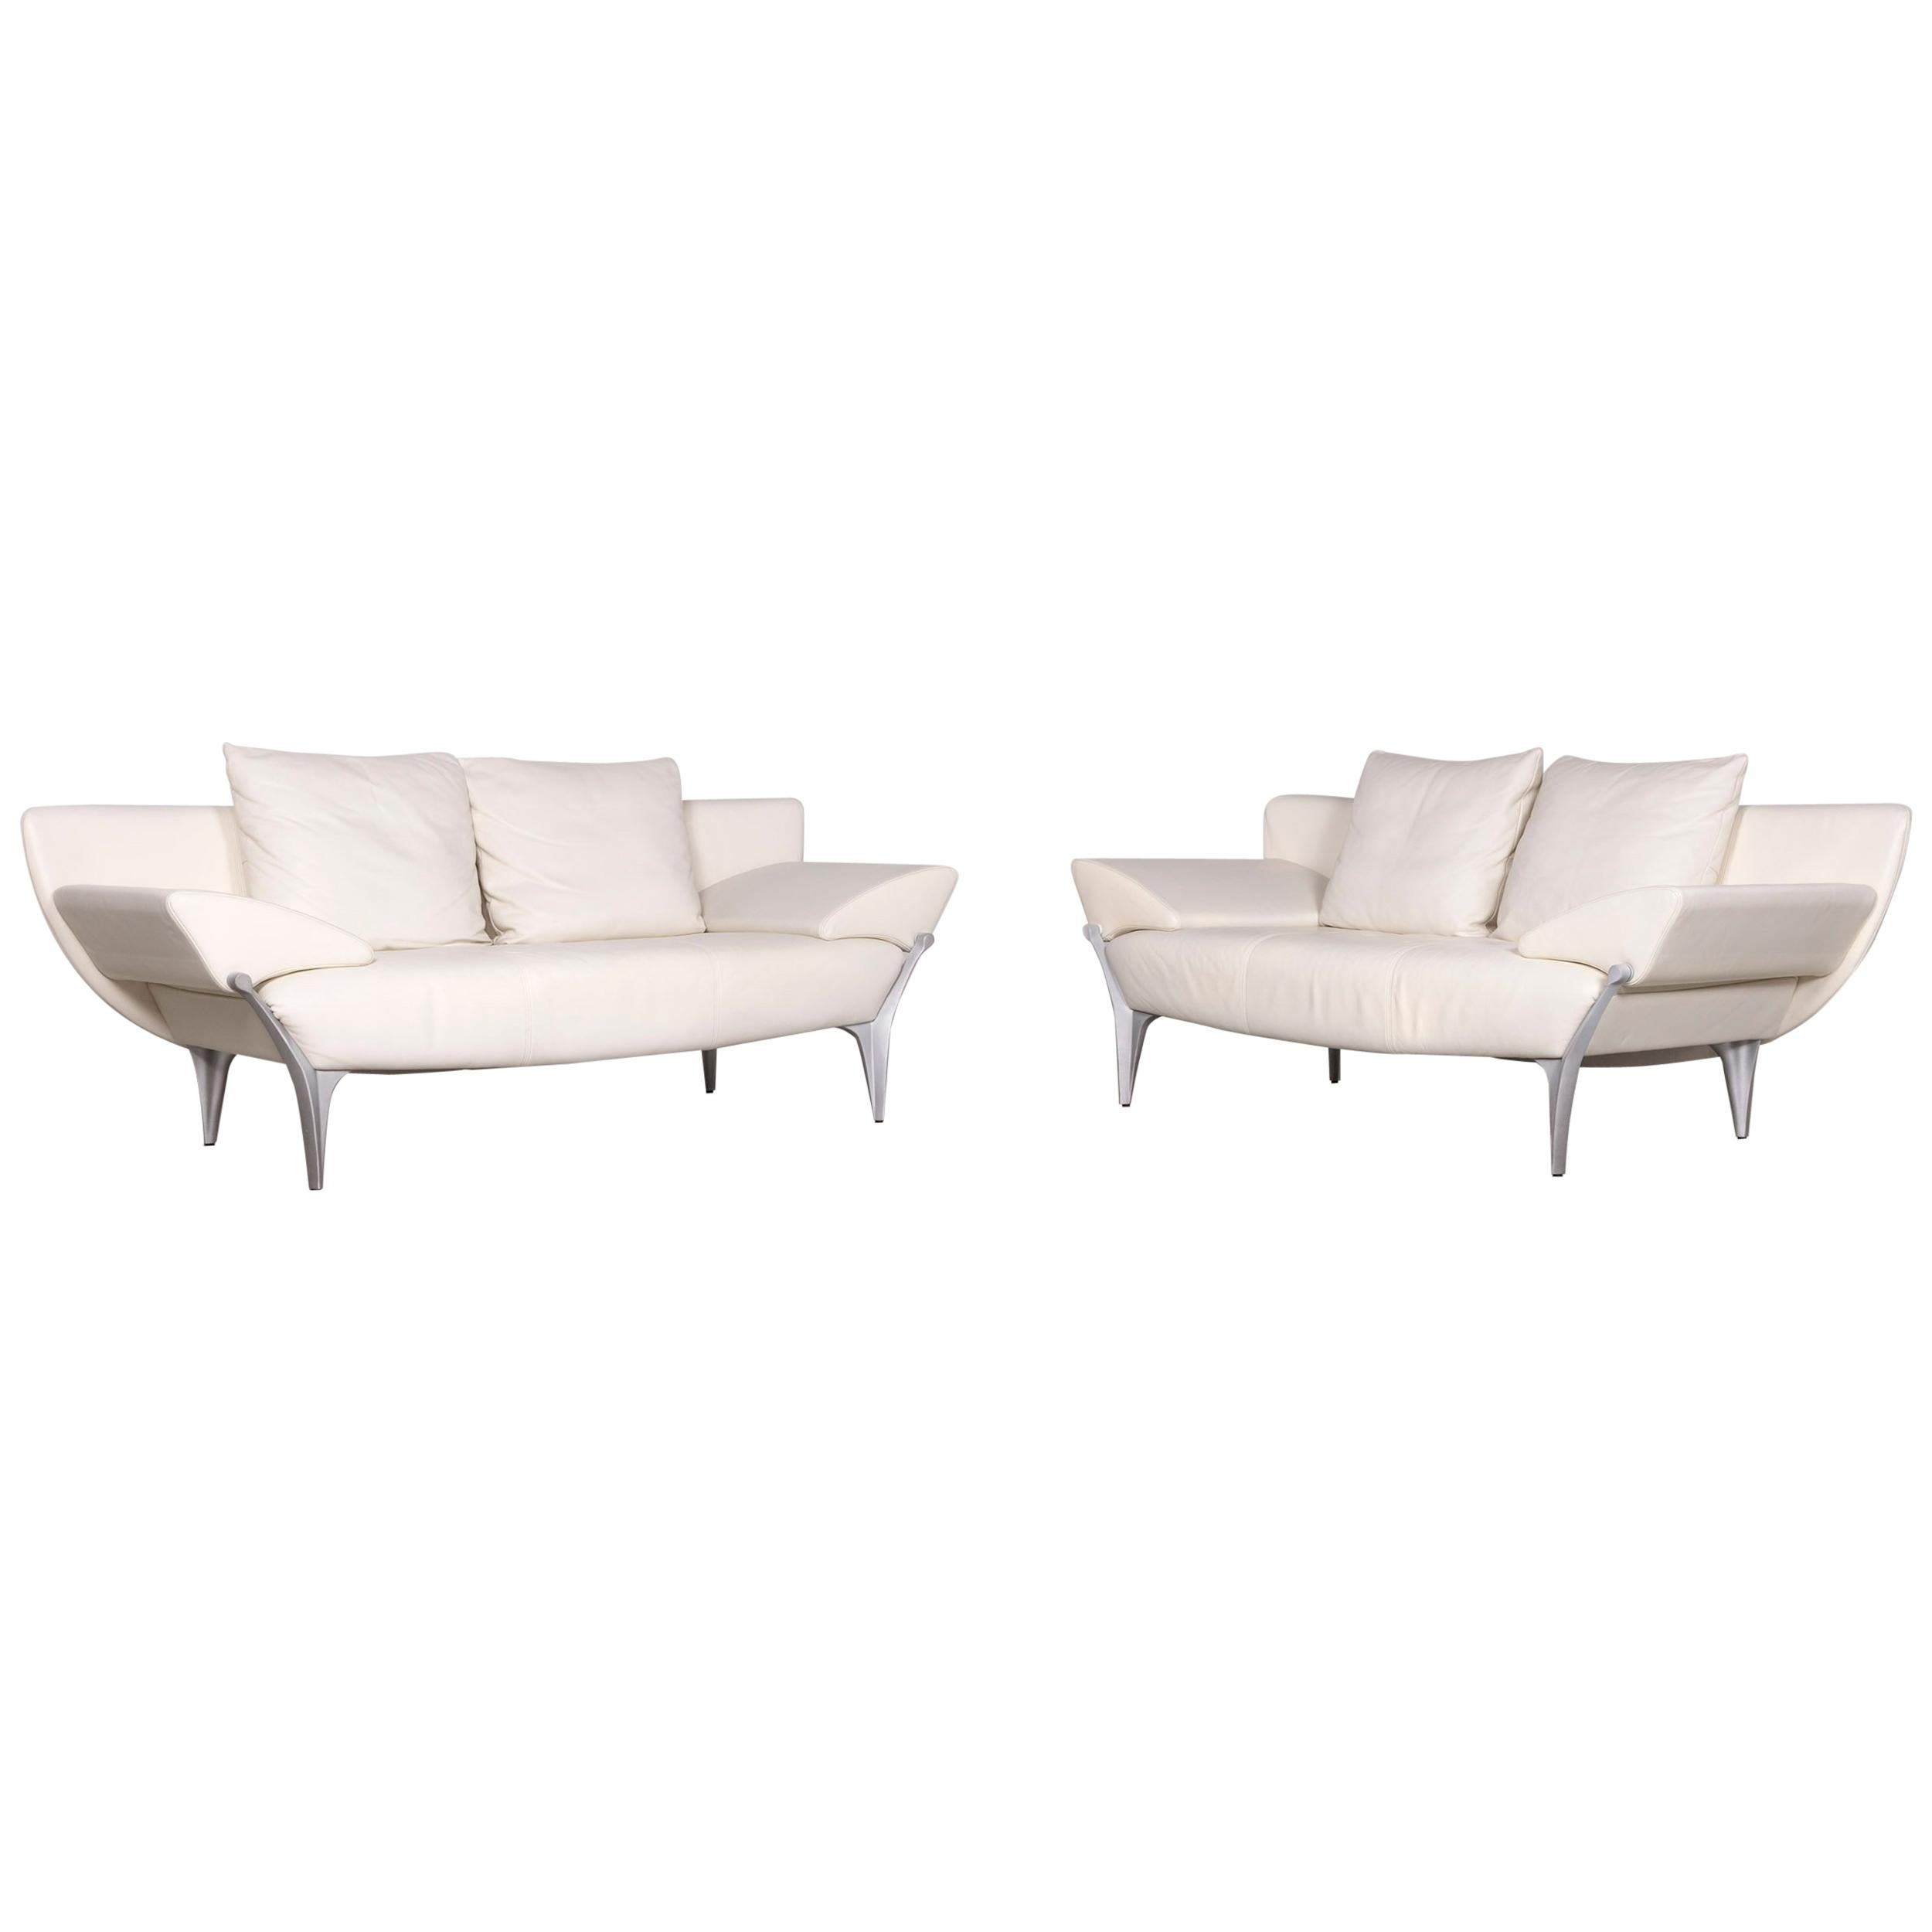 Rolf Benz 1600 Designer Leather Sofa Set Crème Two-Seat Couch